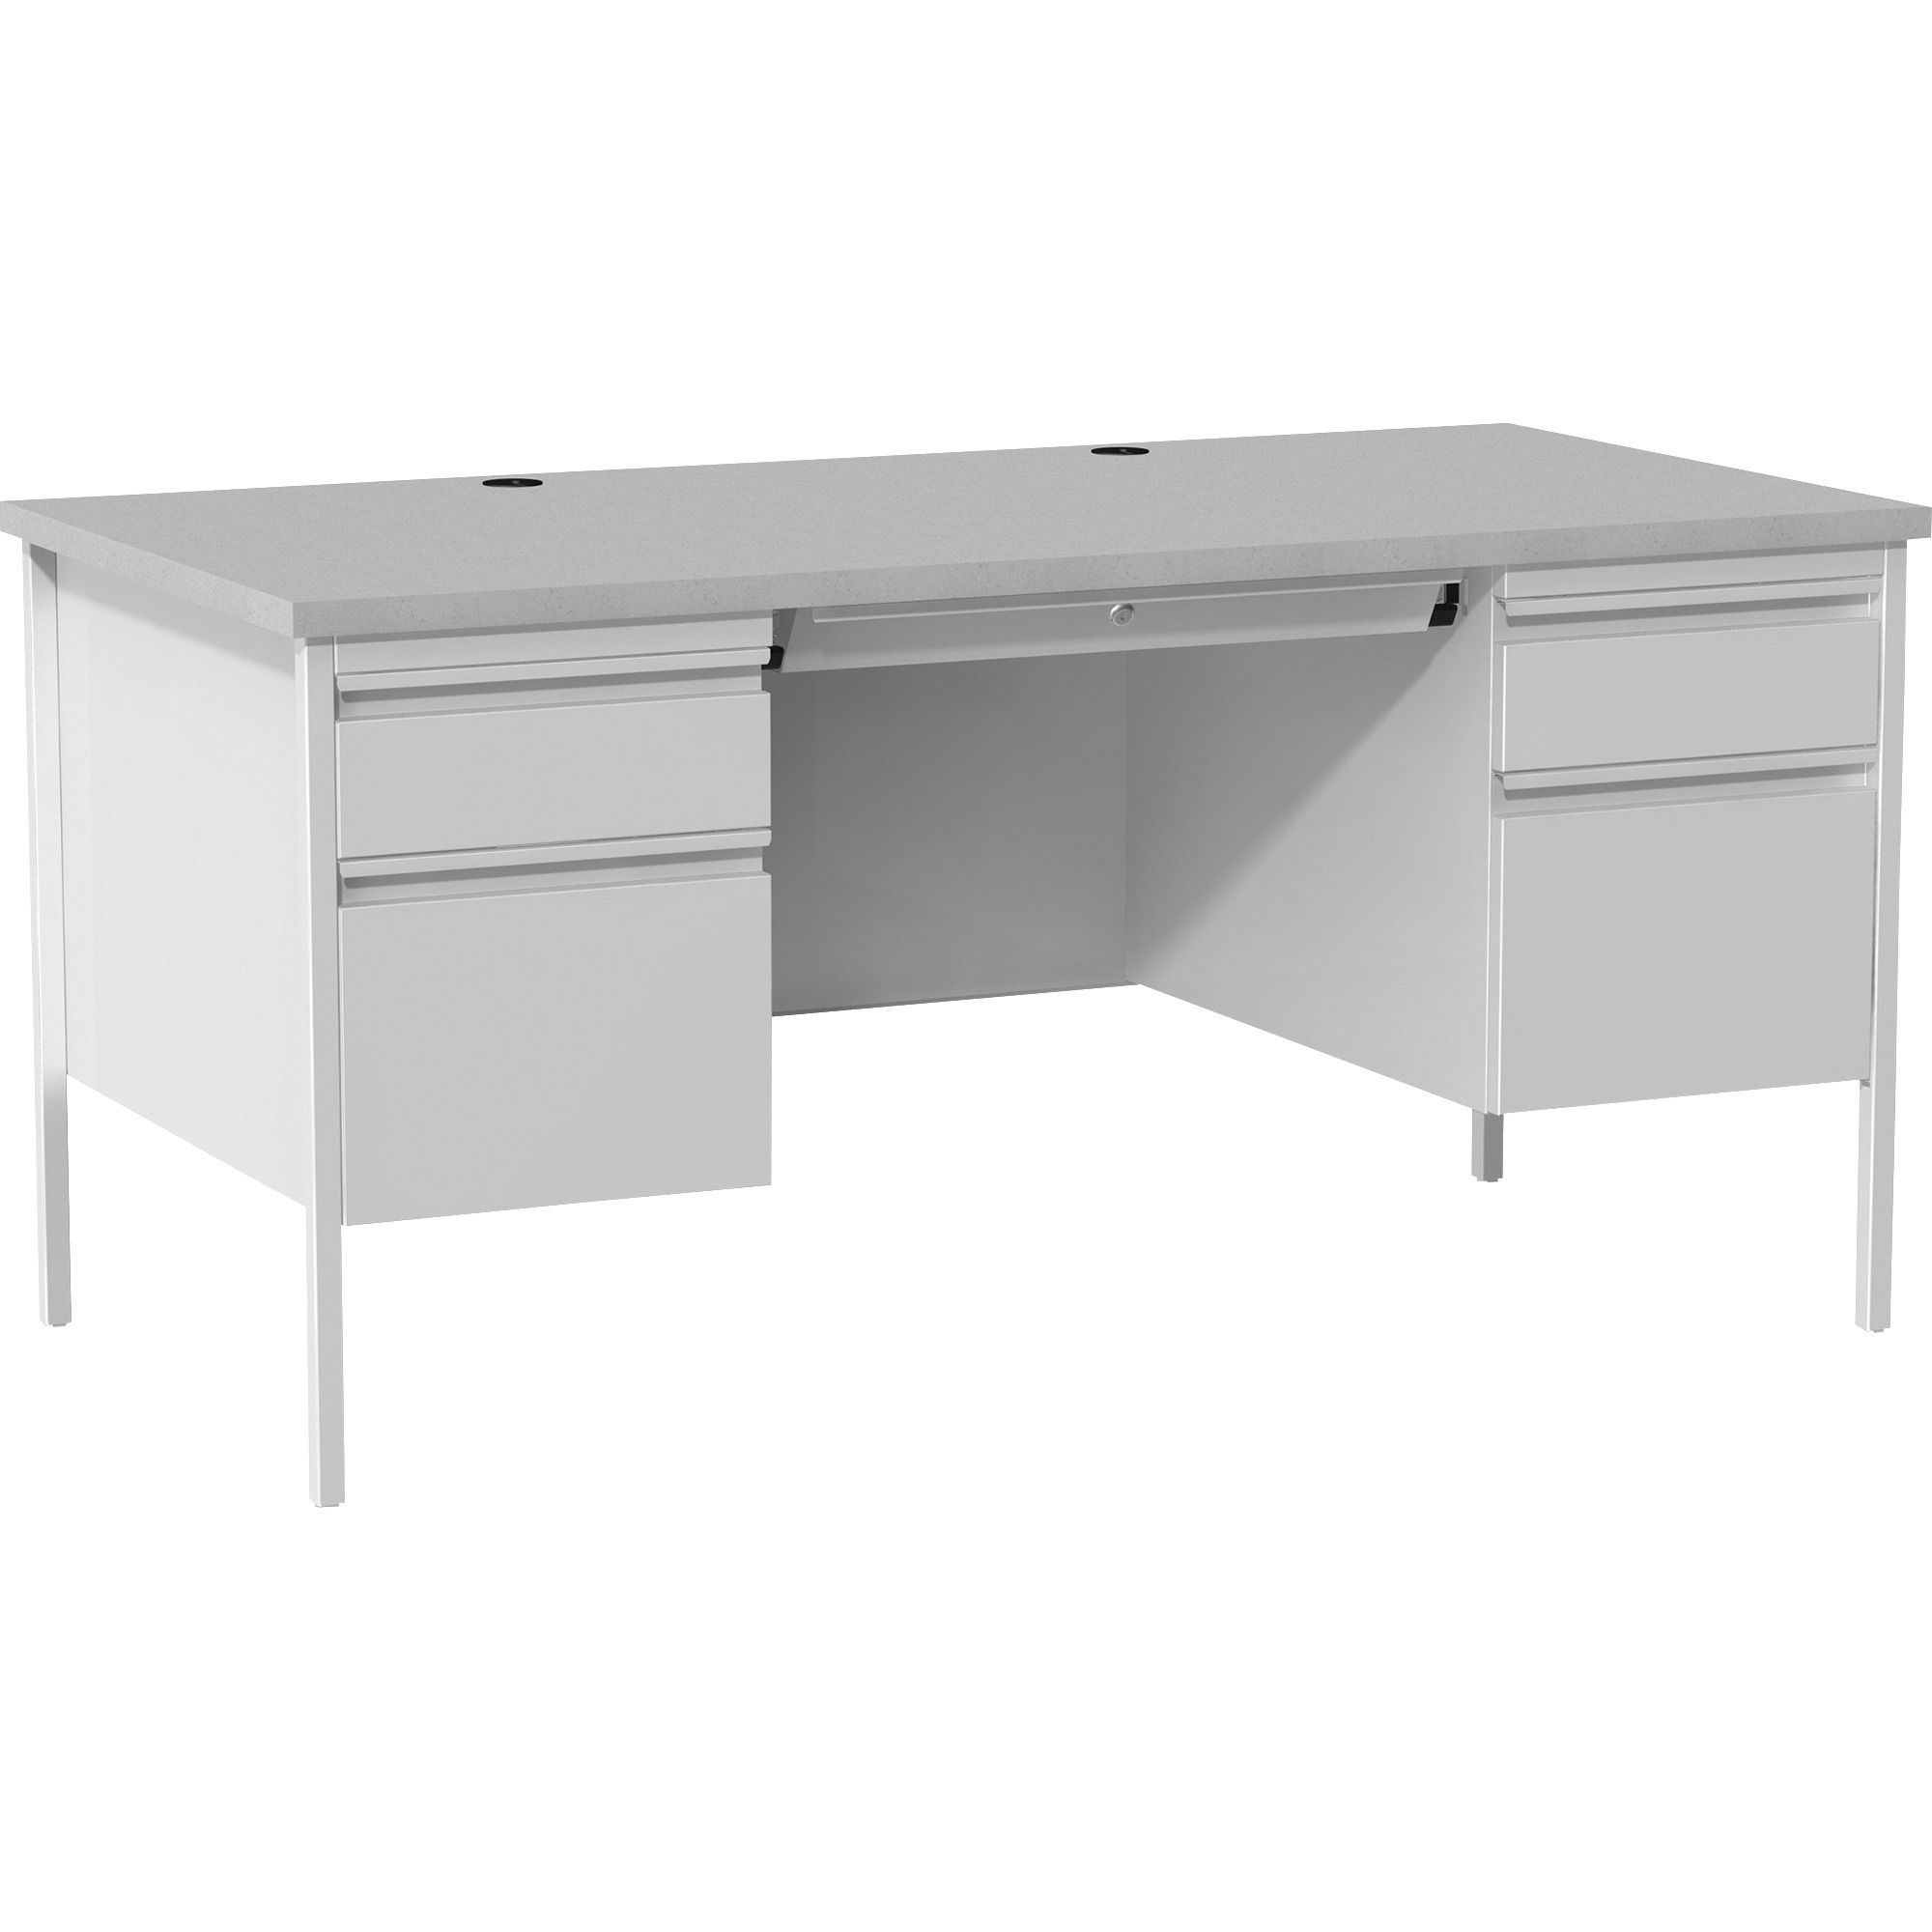 Lorell Grey Double Pedestal Steel/laminate Desk – 2 Pedestals – 30 Pertaining To Gray Reversible Desks With Pedestal (View 6 of 15)